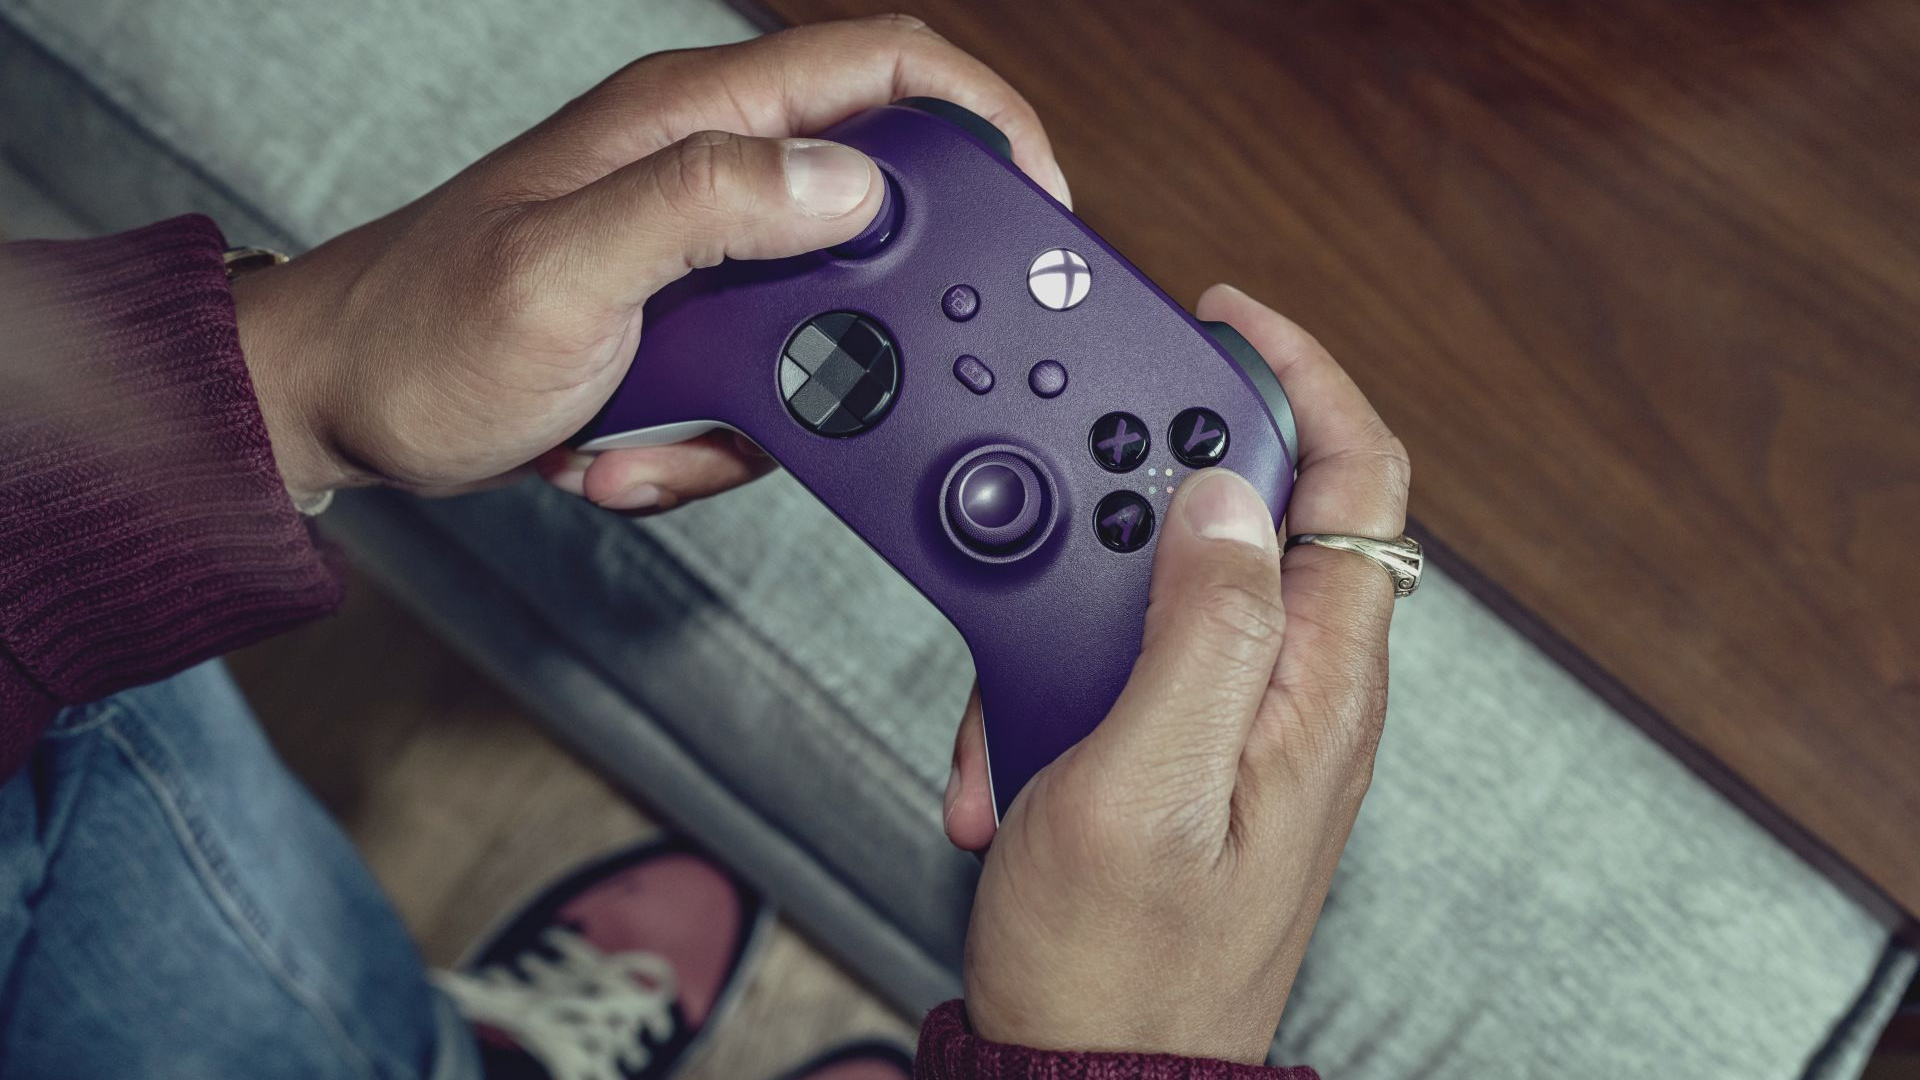 Show Off Your Prestige with the New Xbox Wireless Controller – Astral Purple